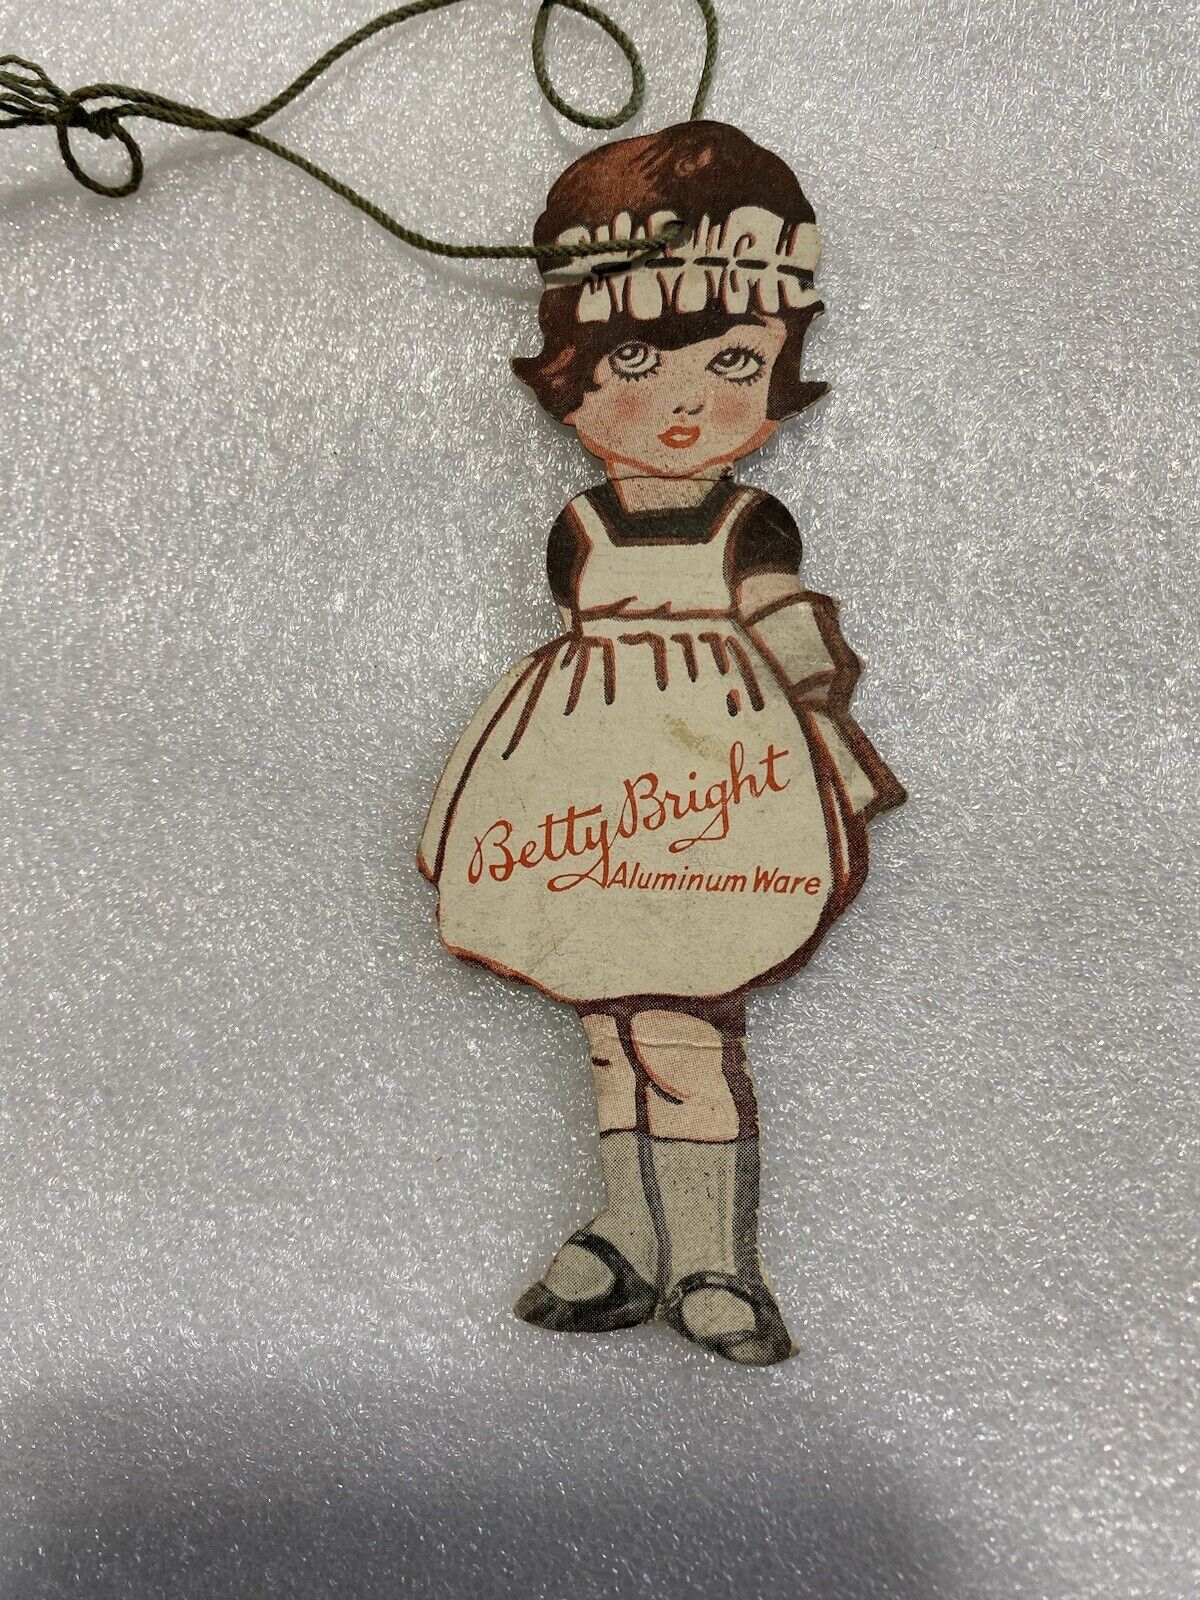 Vtg 1920’s Betty Bright Aluminum Die Cut Maid Housewives  Advertising Hang Tag